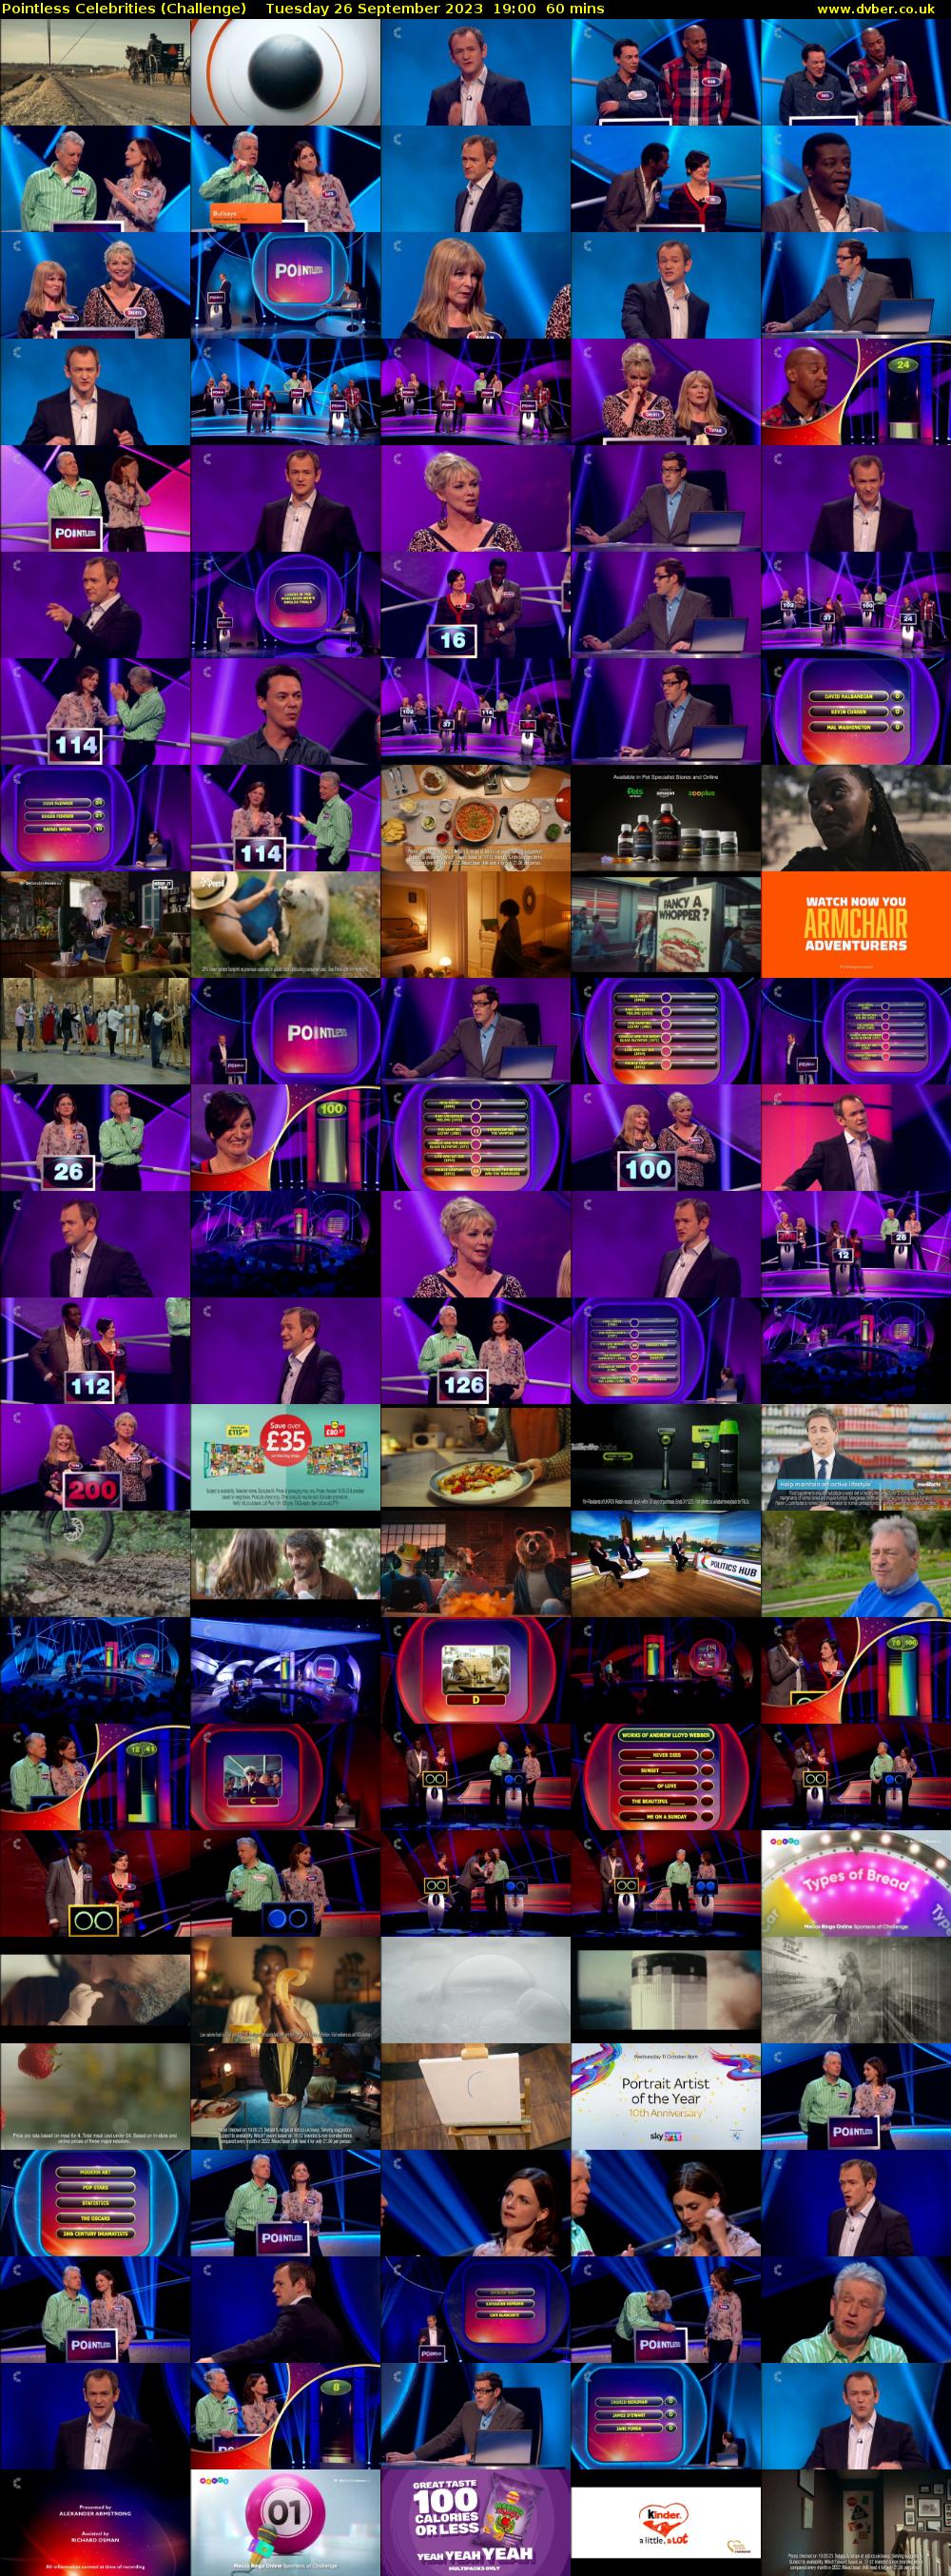 Pointless Celebrities (Challenge) Tuesday 26 September 2023 19:00 - 20:00